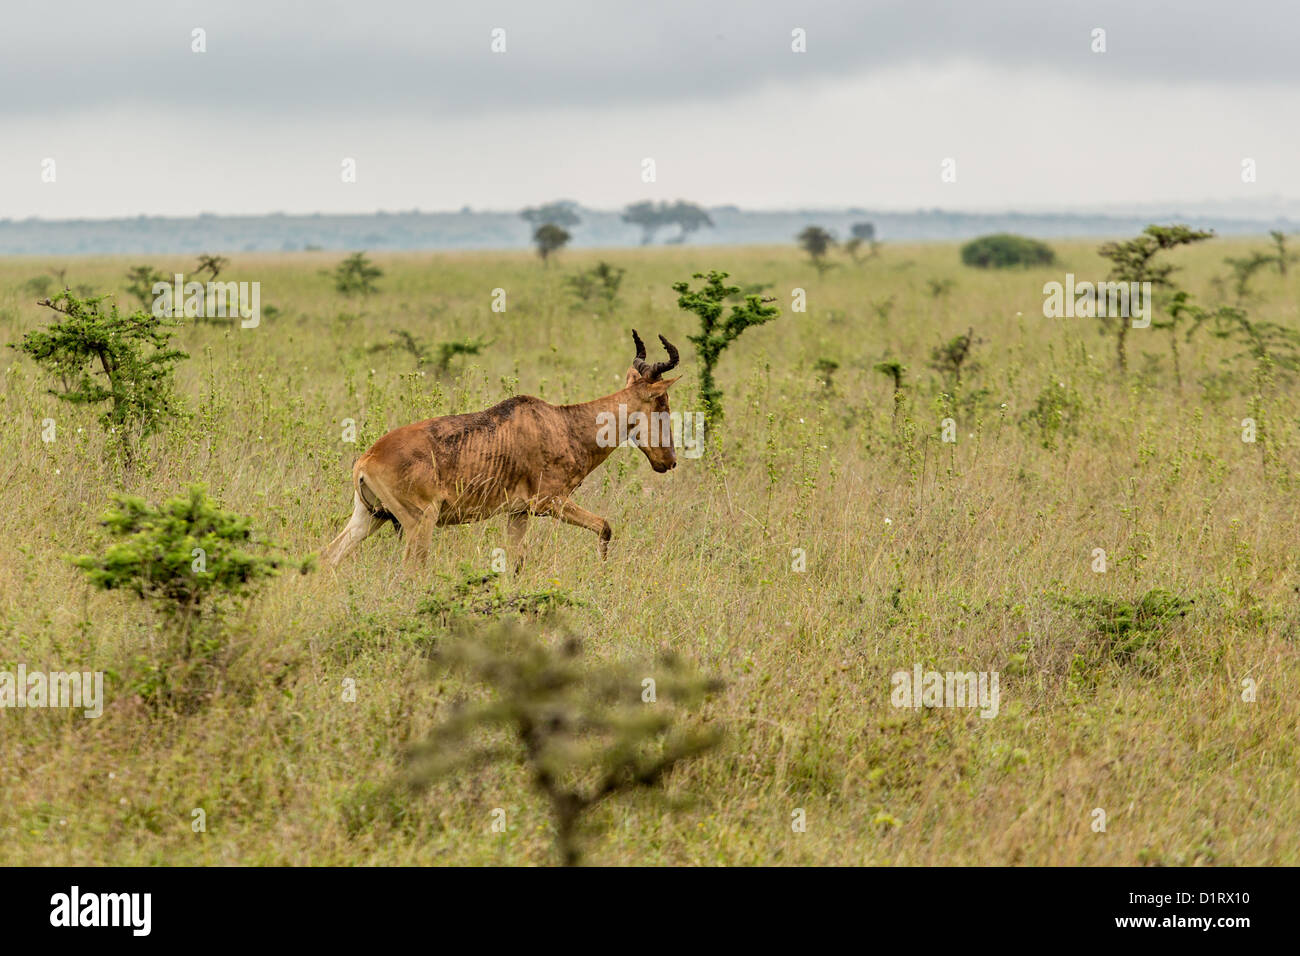 An impala in the grasslands of the Nairobi National Park Stock Photo